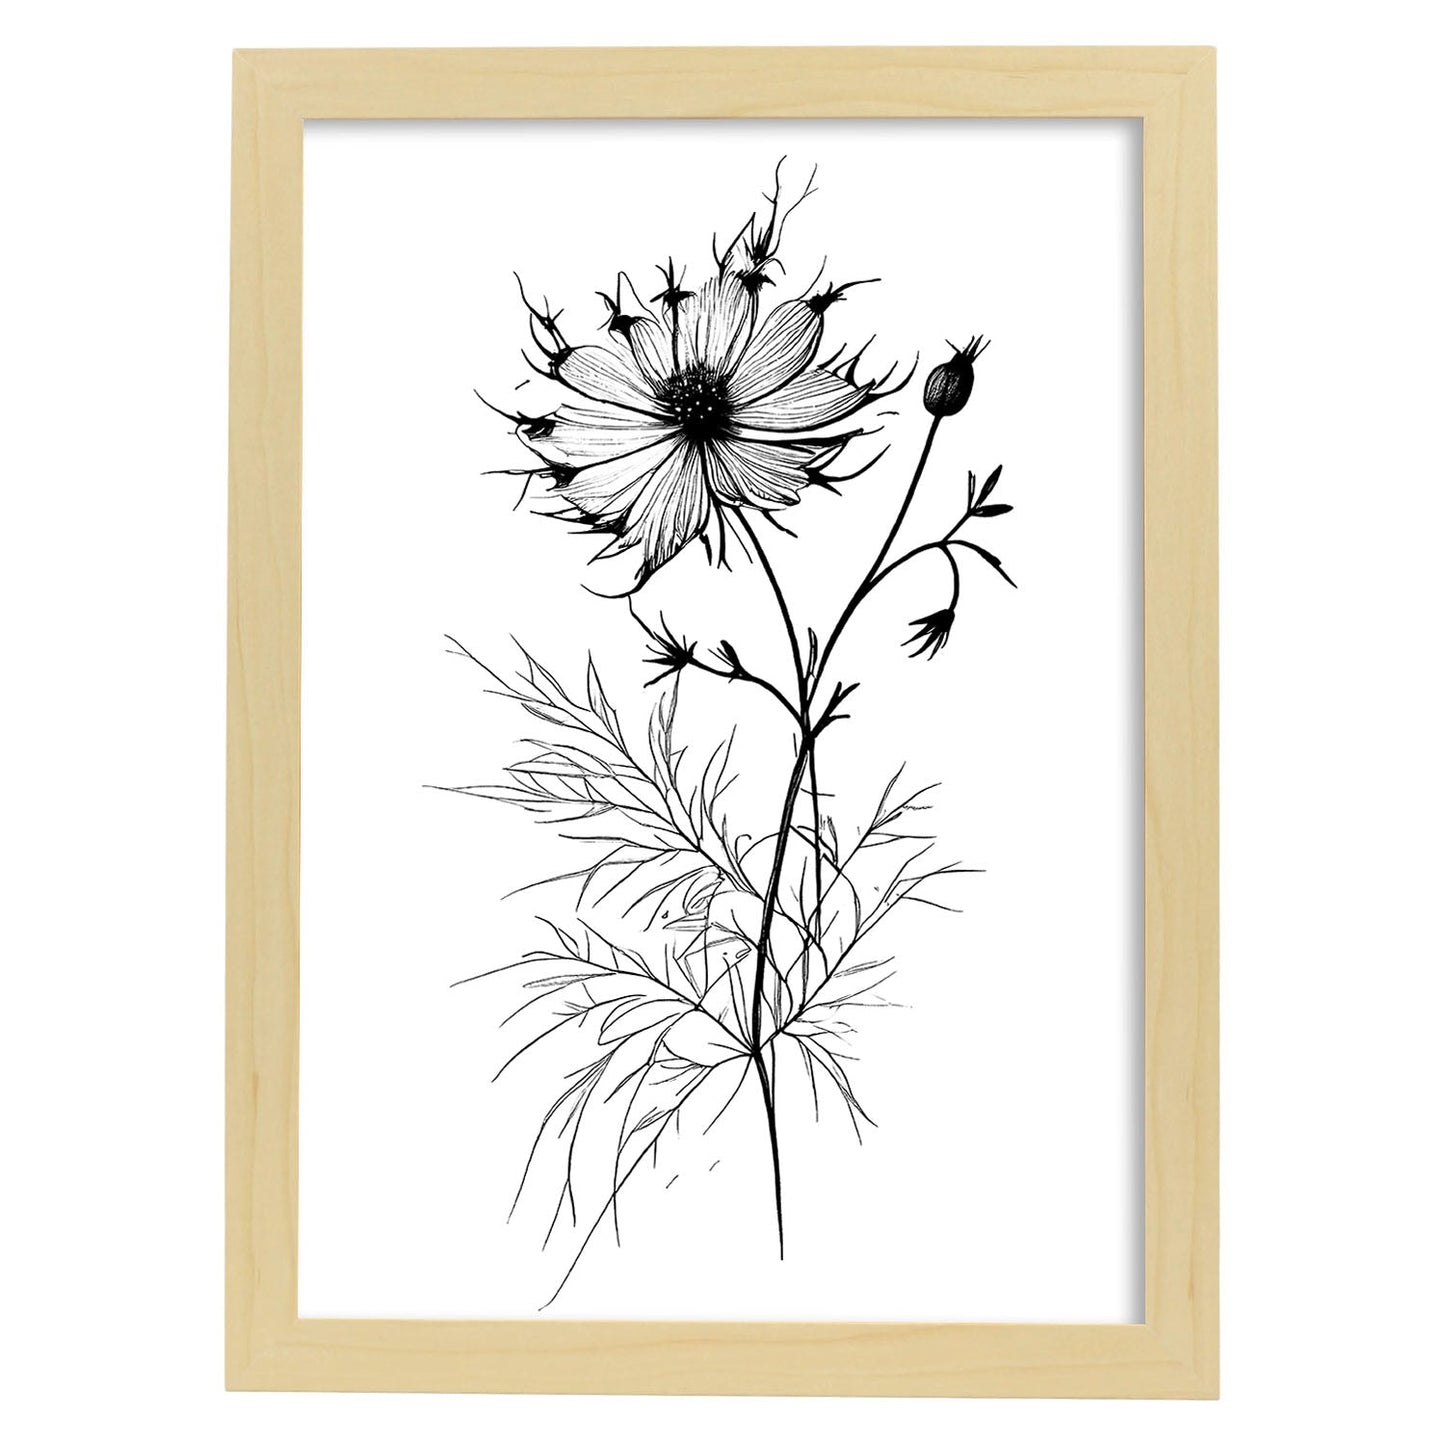 Nacnic Love-in-a-Mist Minimalist Line Art_3. Aesthetic Wall Art Prints for Bedroom or Living Room Design.